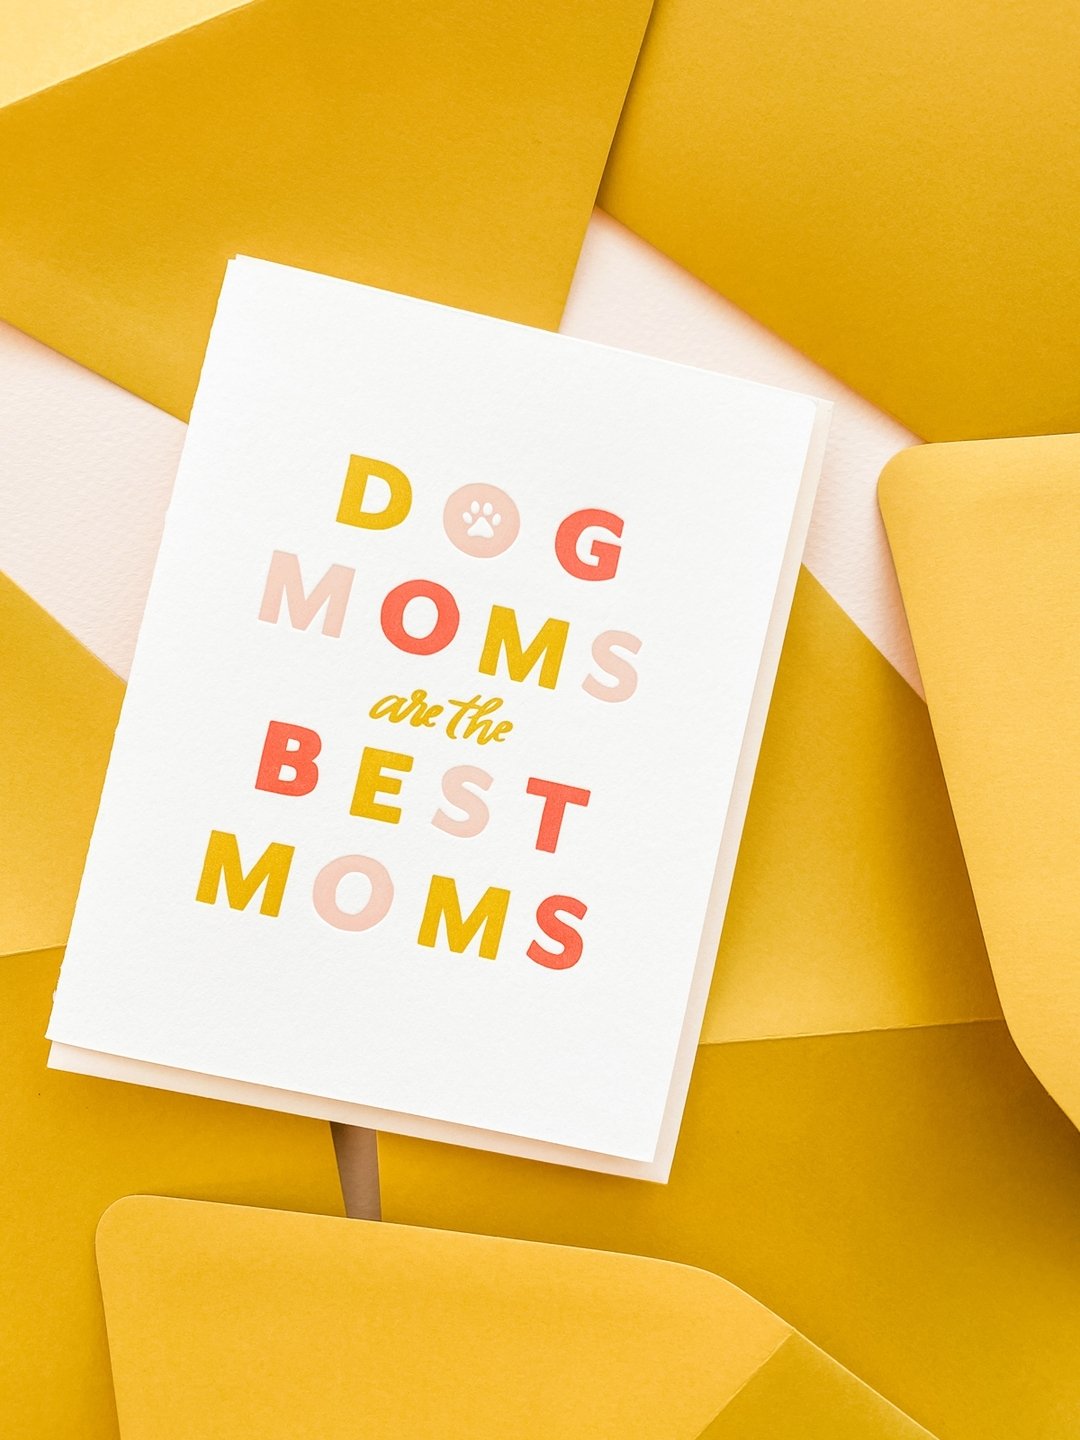 Shop this sweet note at link in bio or in store today 11a - 5p. 🐾

#DogMomMothersDay #DogMomGreetingCard #MothersDay2024 #MothersDay #DogMom #DogMomLife #DogLover #DogLovers #DogMomGift #DogMomGifts #GreetingCard #GreetingCards #MothersDay2024Card #